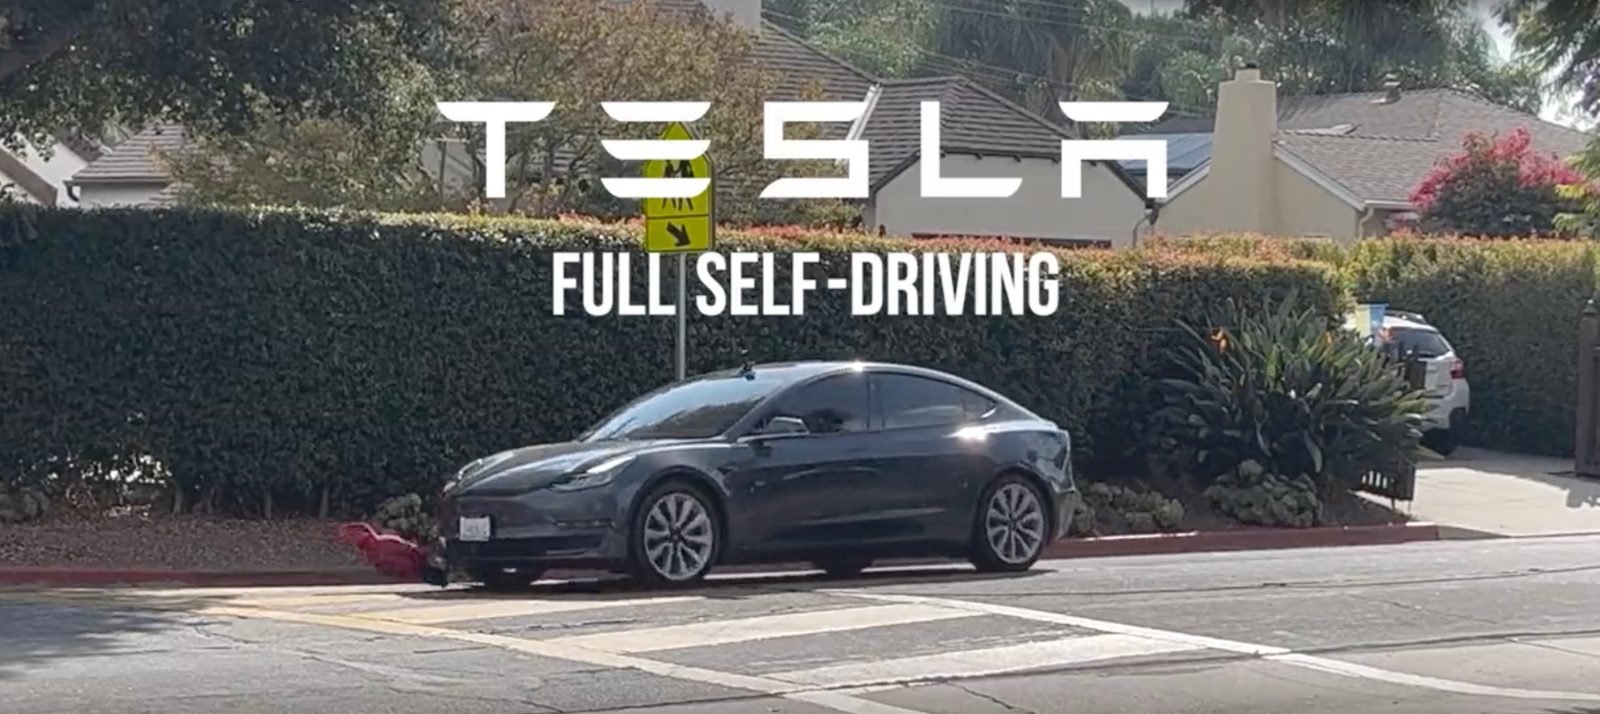 Tesla to Spill Autopilot Secrets as NHTSA Cracks Down – Everything You’ve Been Waiting For!